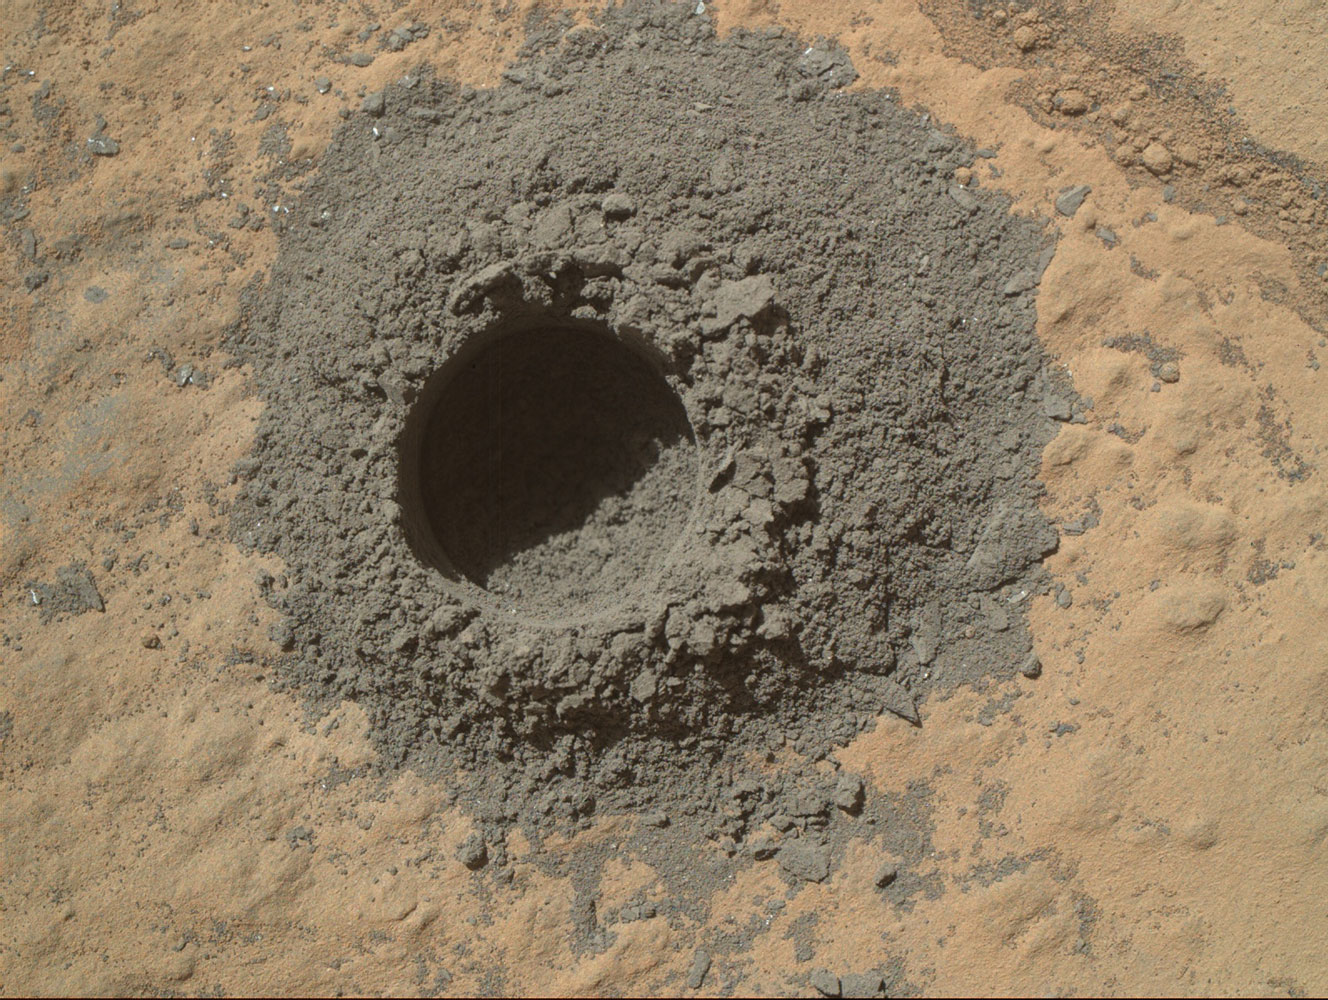 NASA's Curiosity Mars rover completed a shallow "mini drill" activity on April 29, 2014